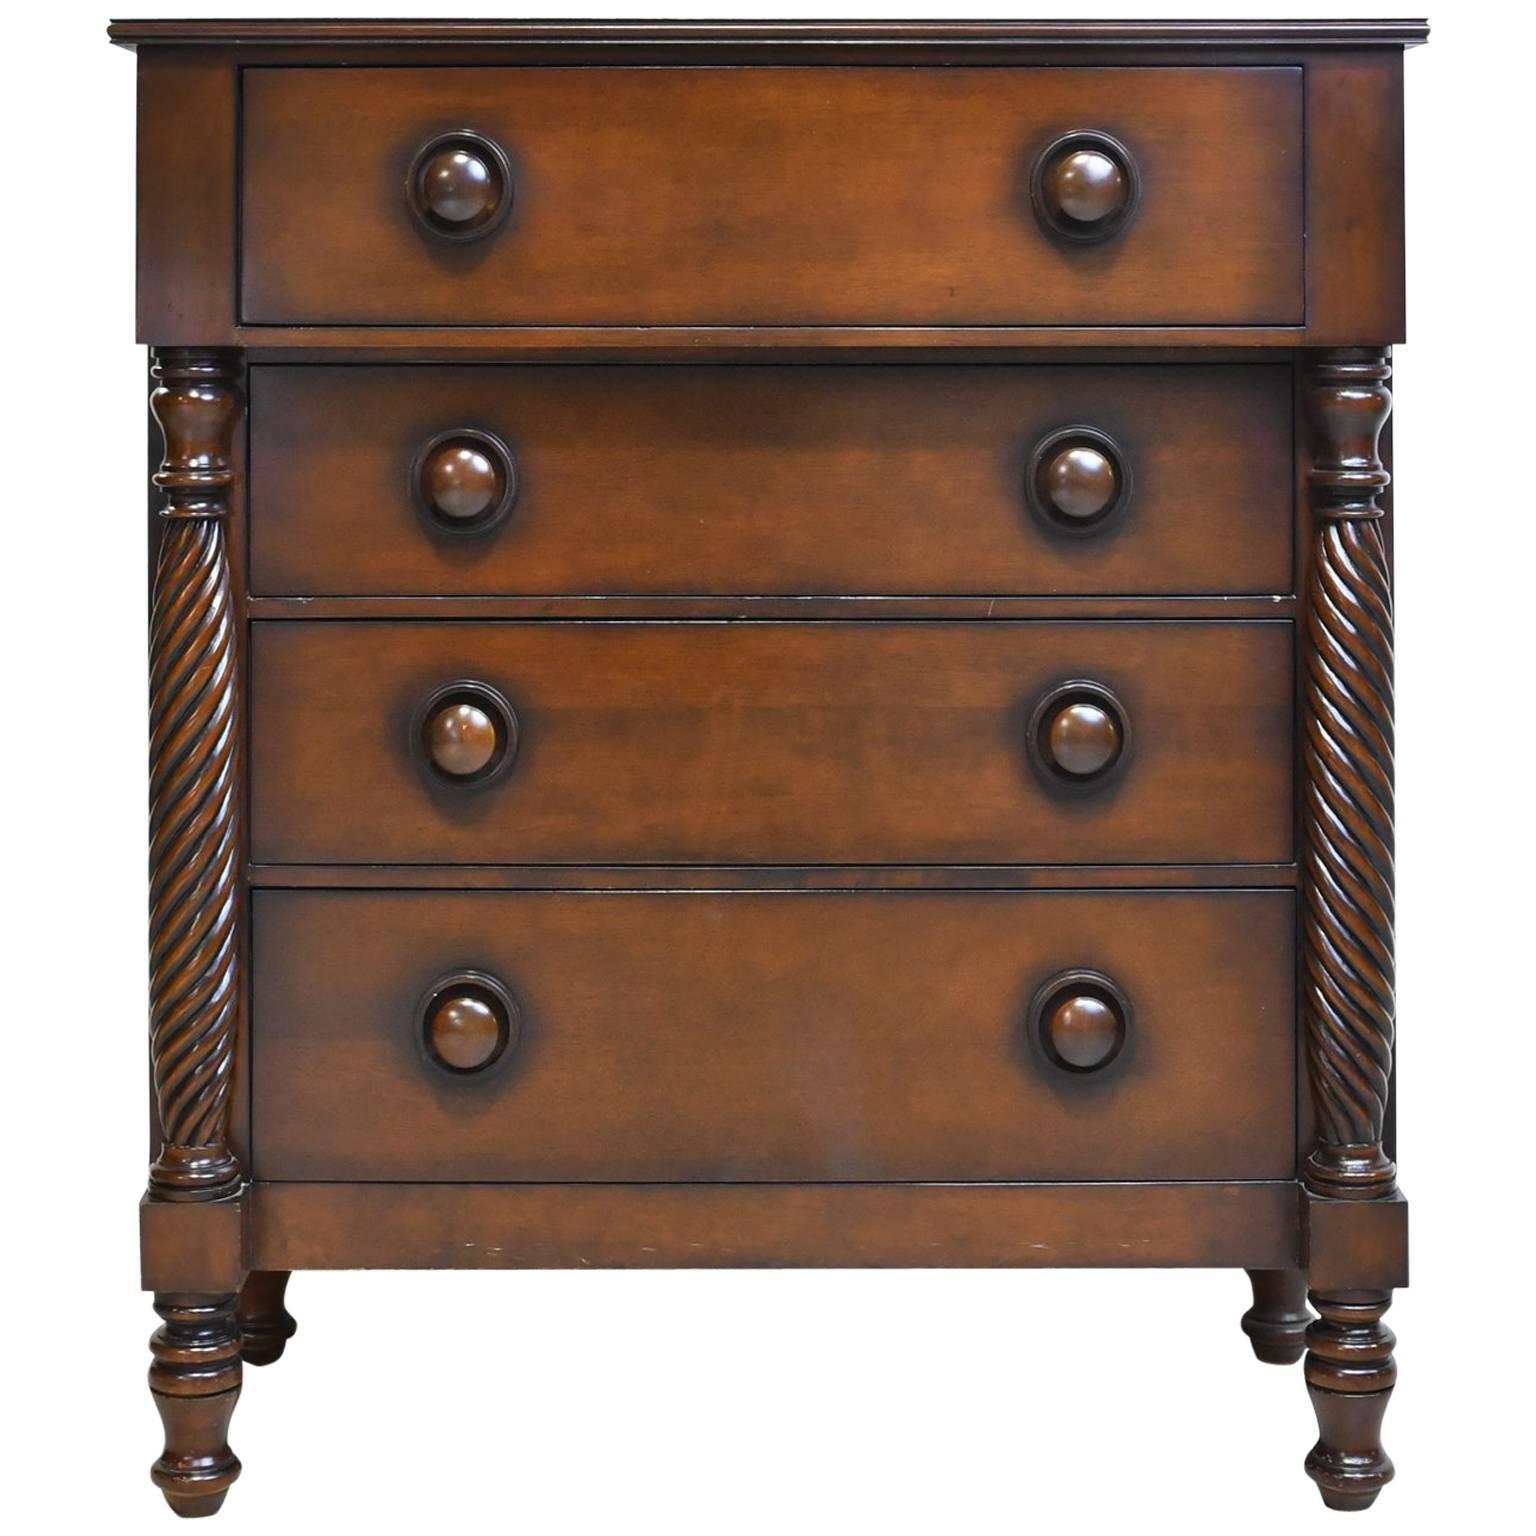 Ralph Lauren British Colonial-Style Bachelor's Chest of Drawers in Mahogany